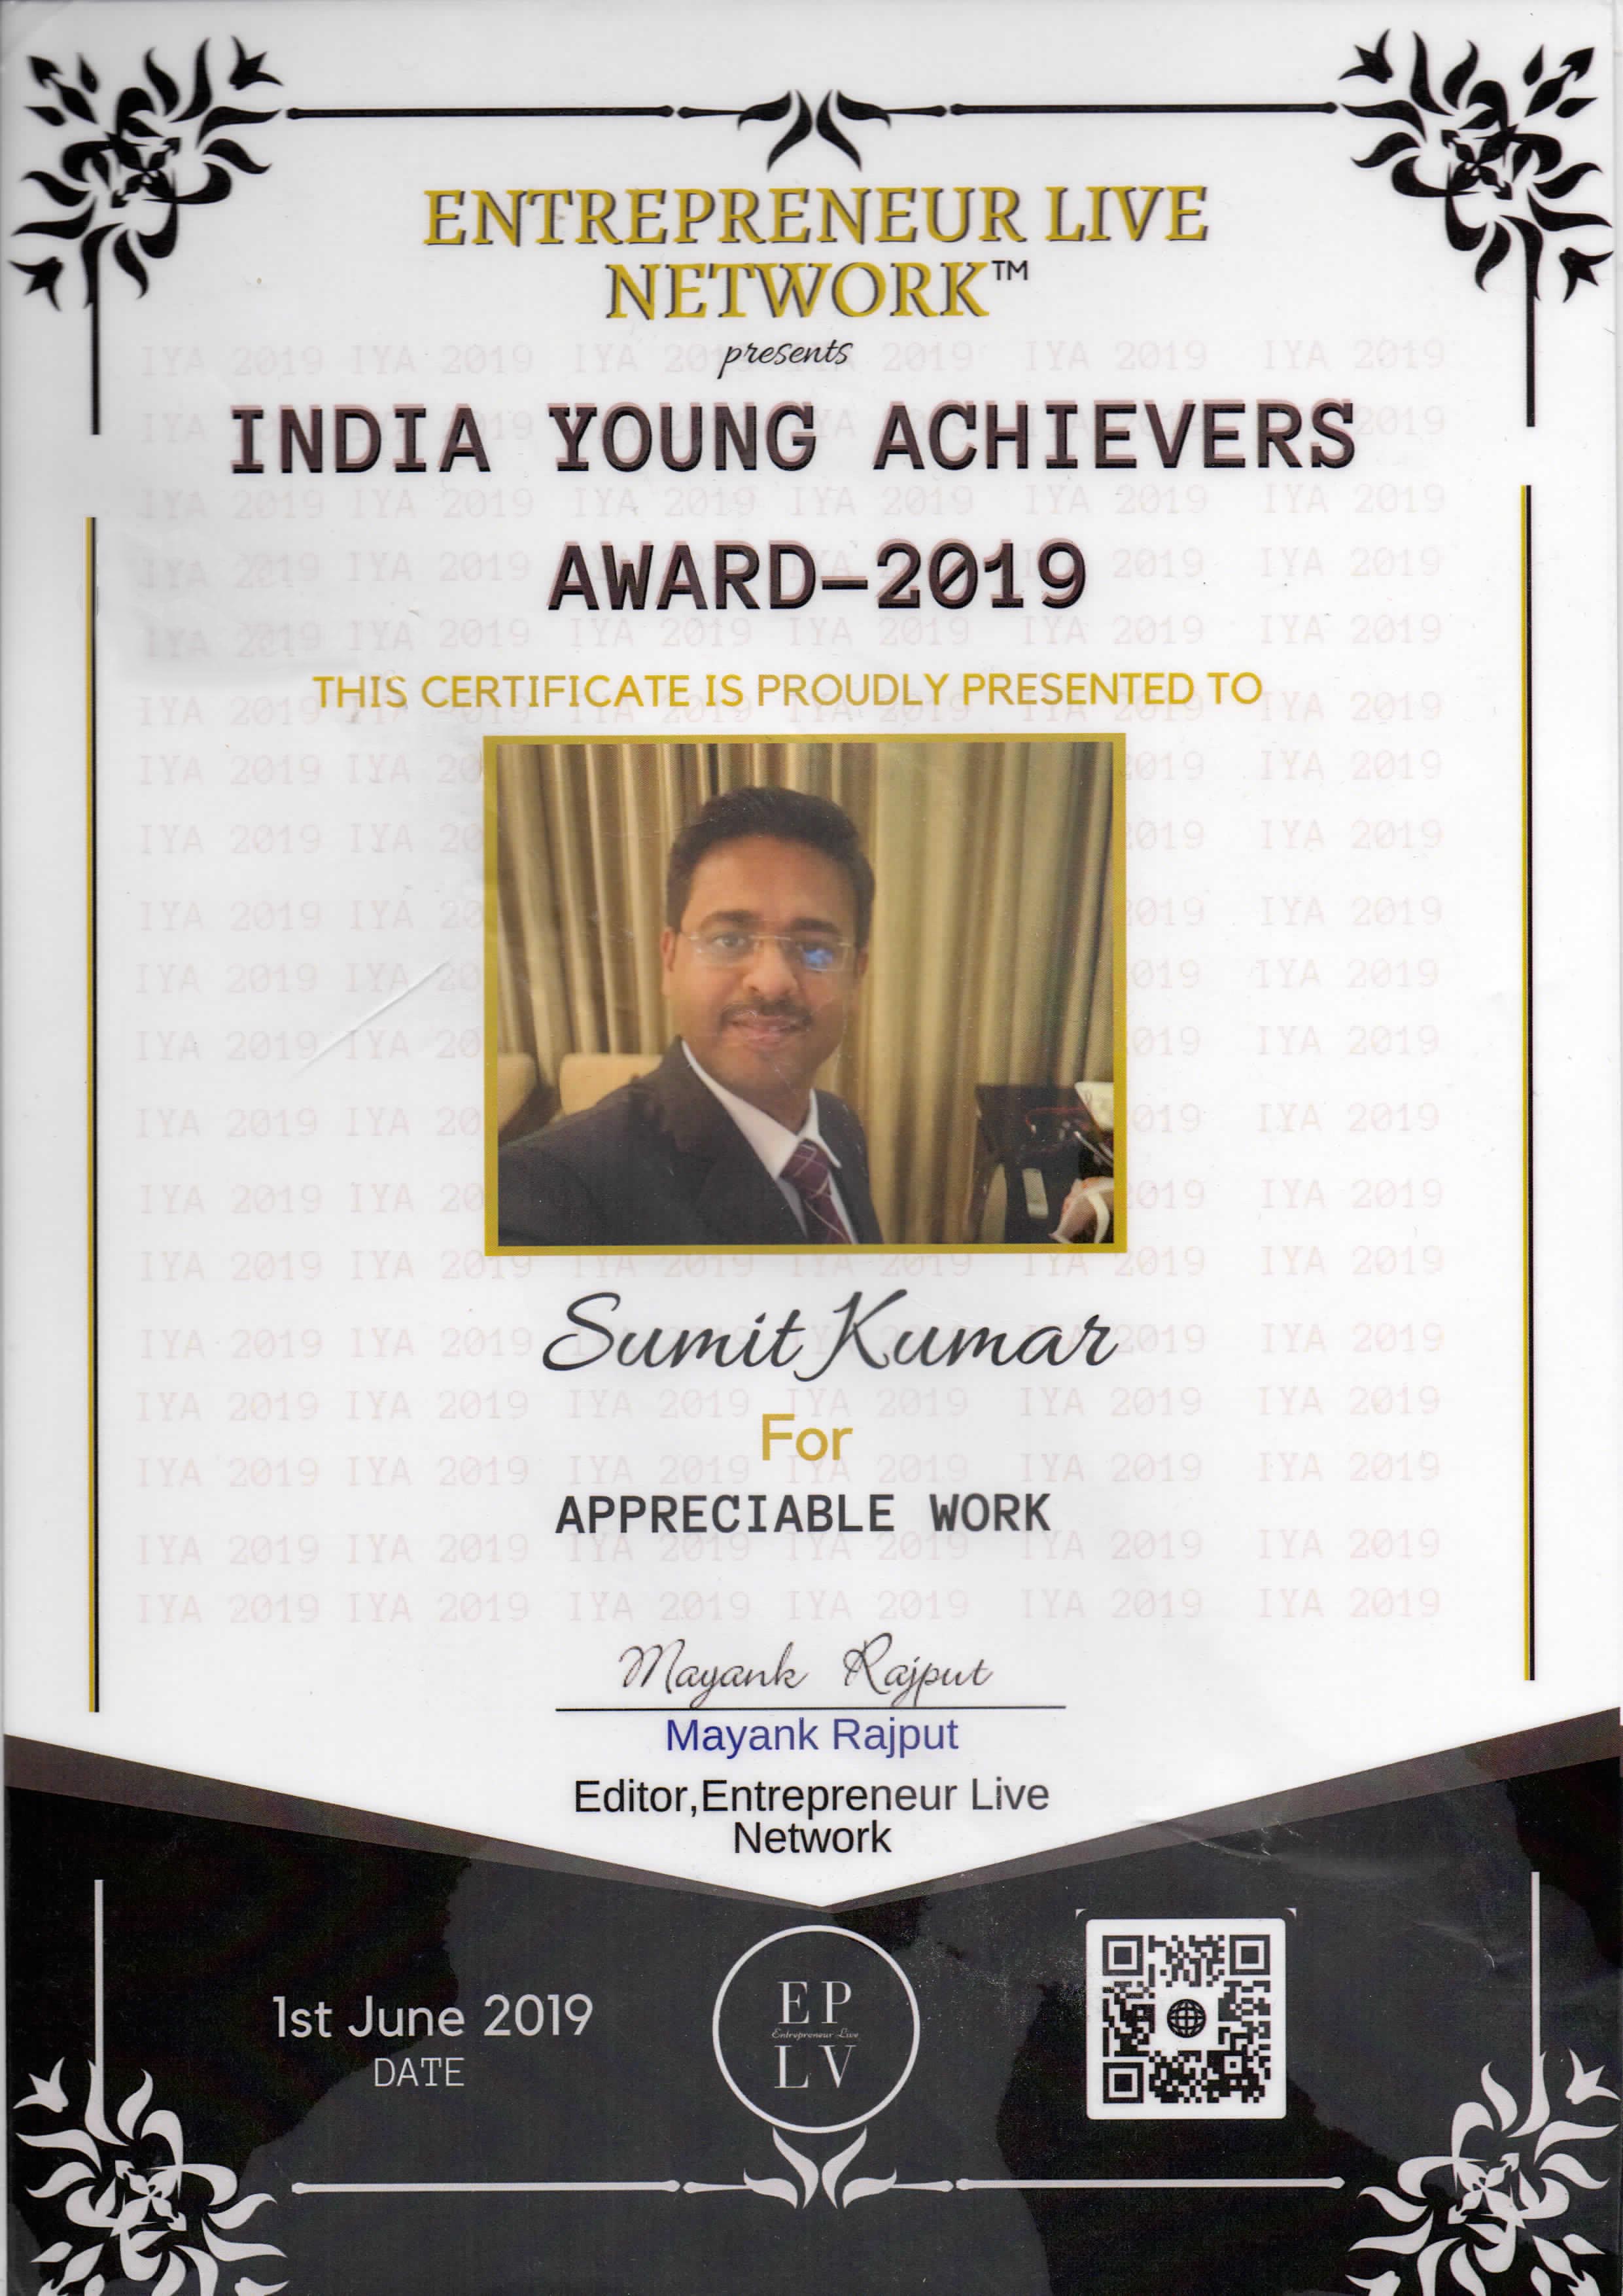 India Young Achievers Award